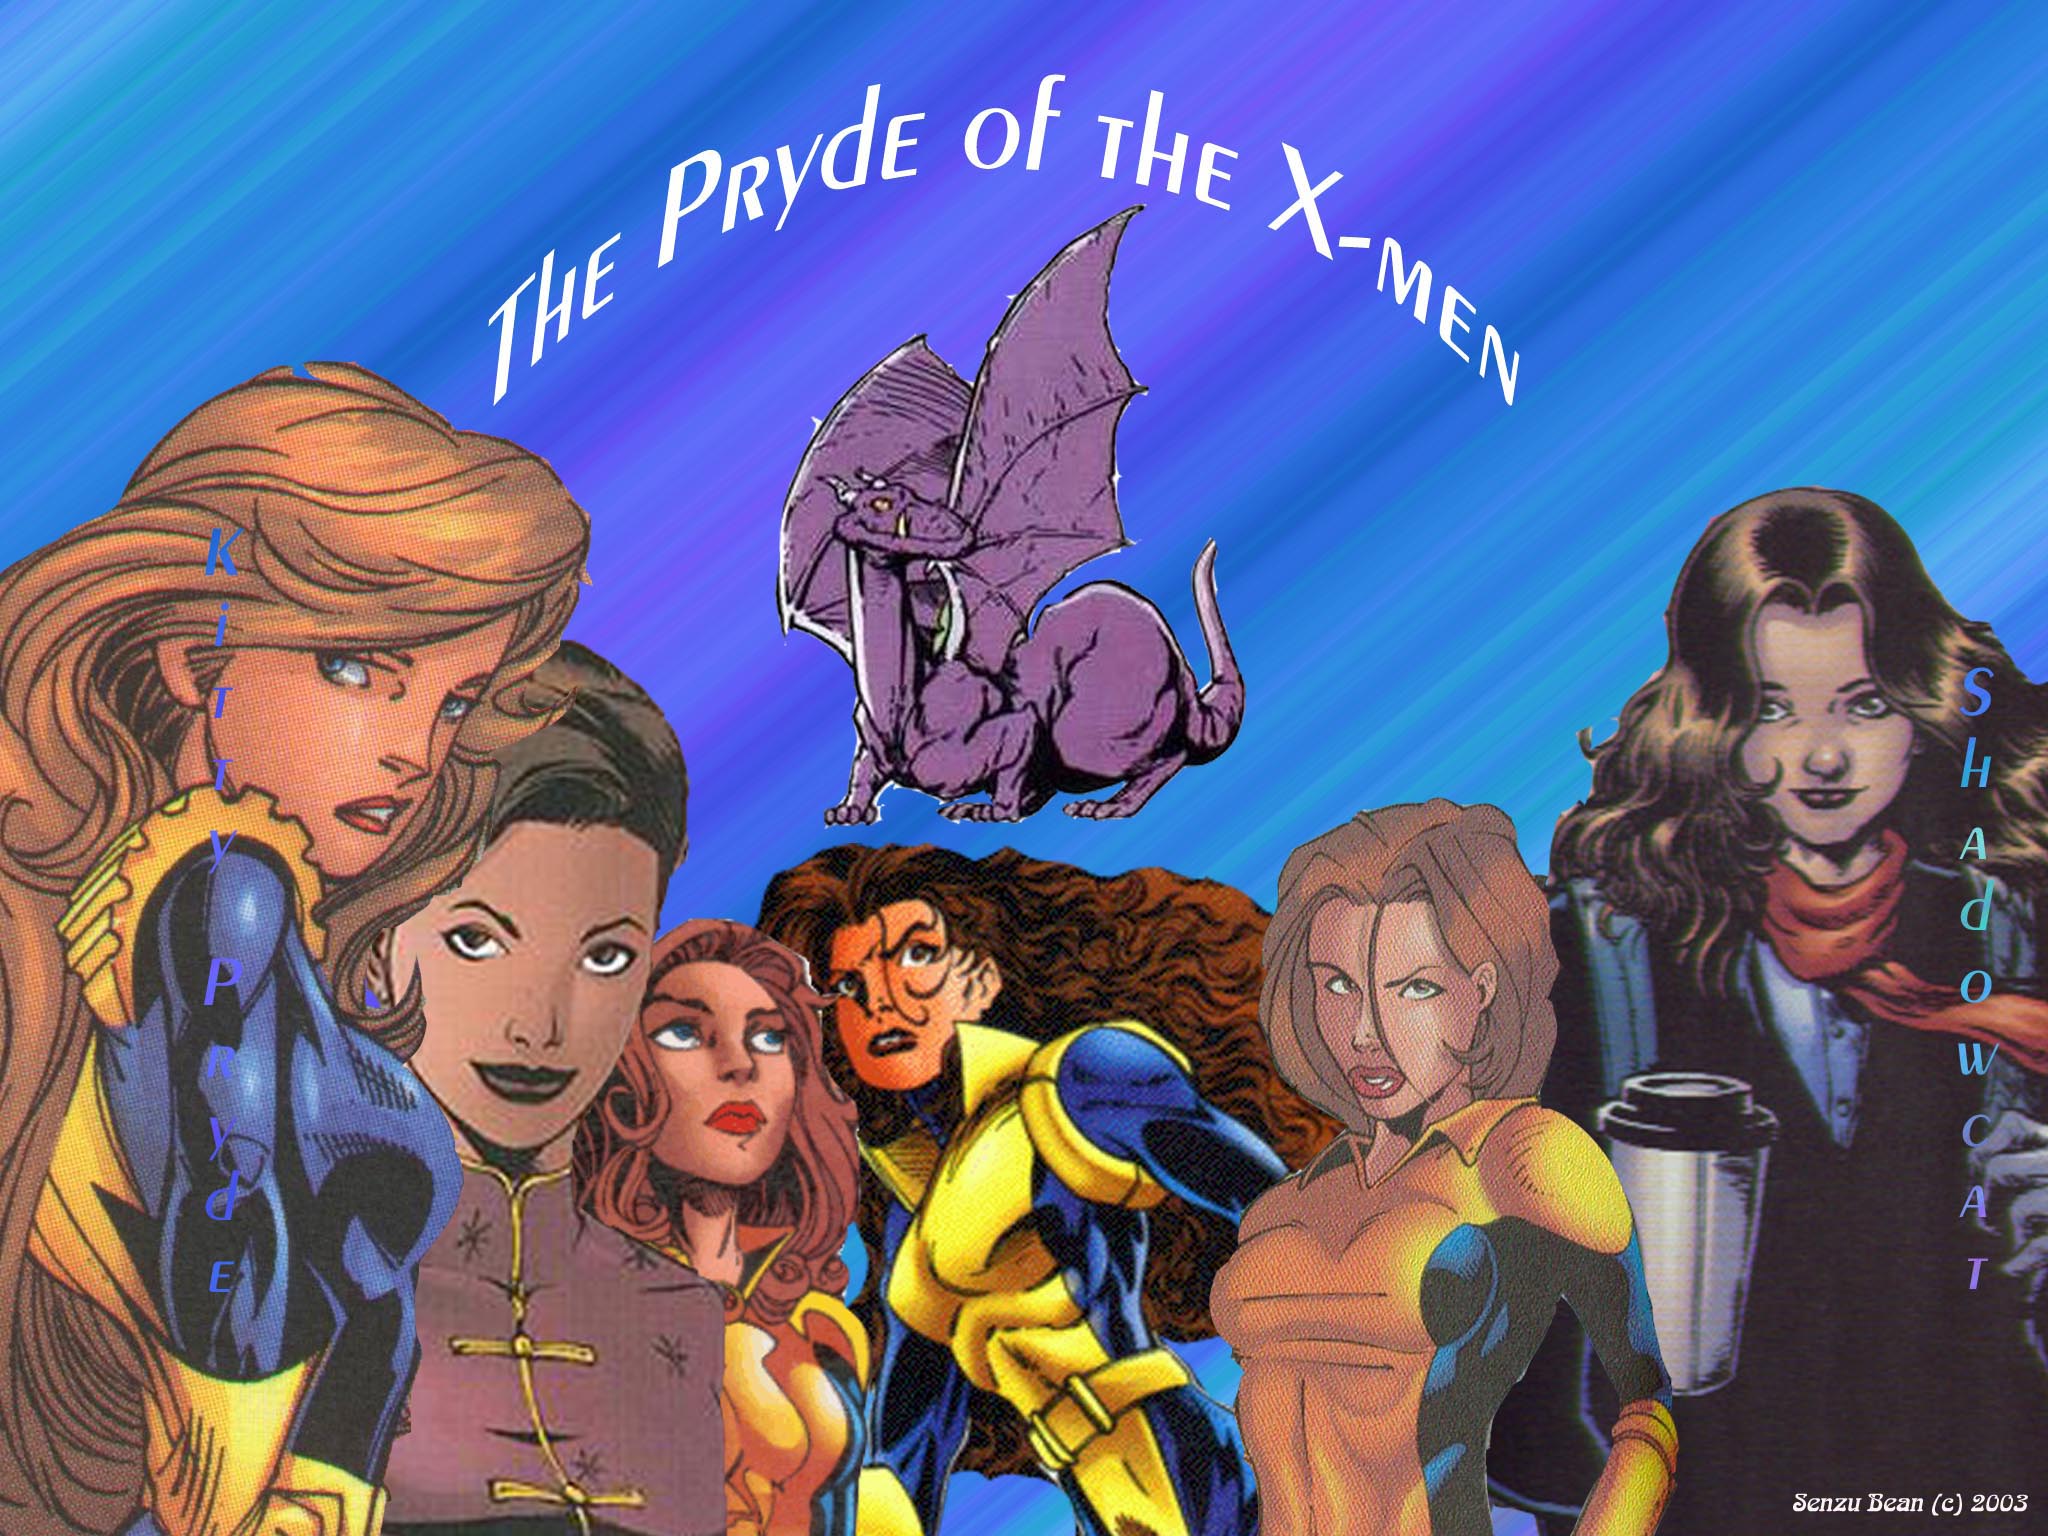 Kitty Pryde Wallpapers